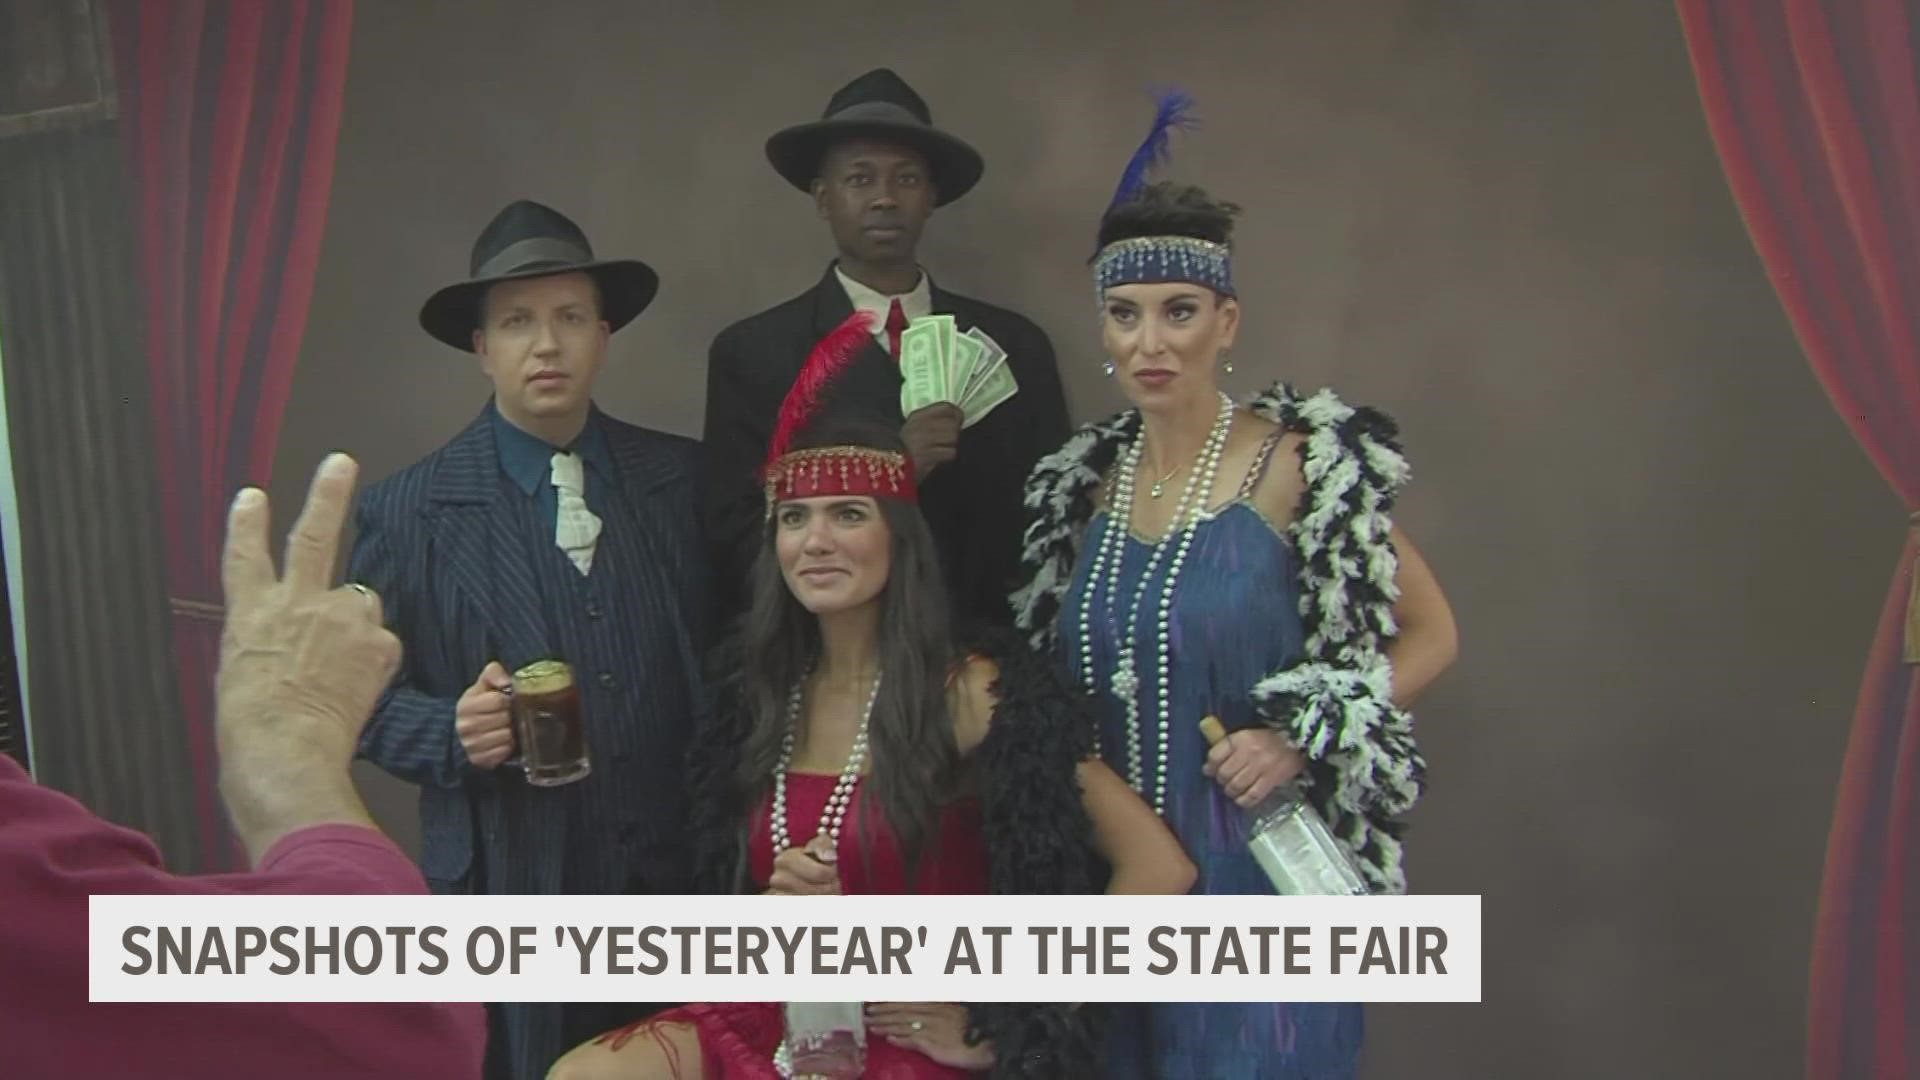 Our morning team had an absolute blast dressing up in old-timey clothes at the Iowa State Fair!